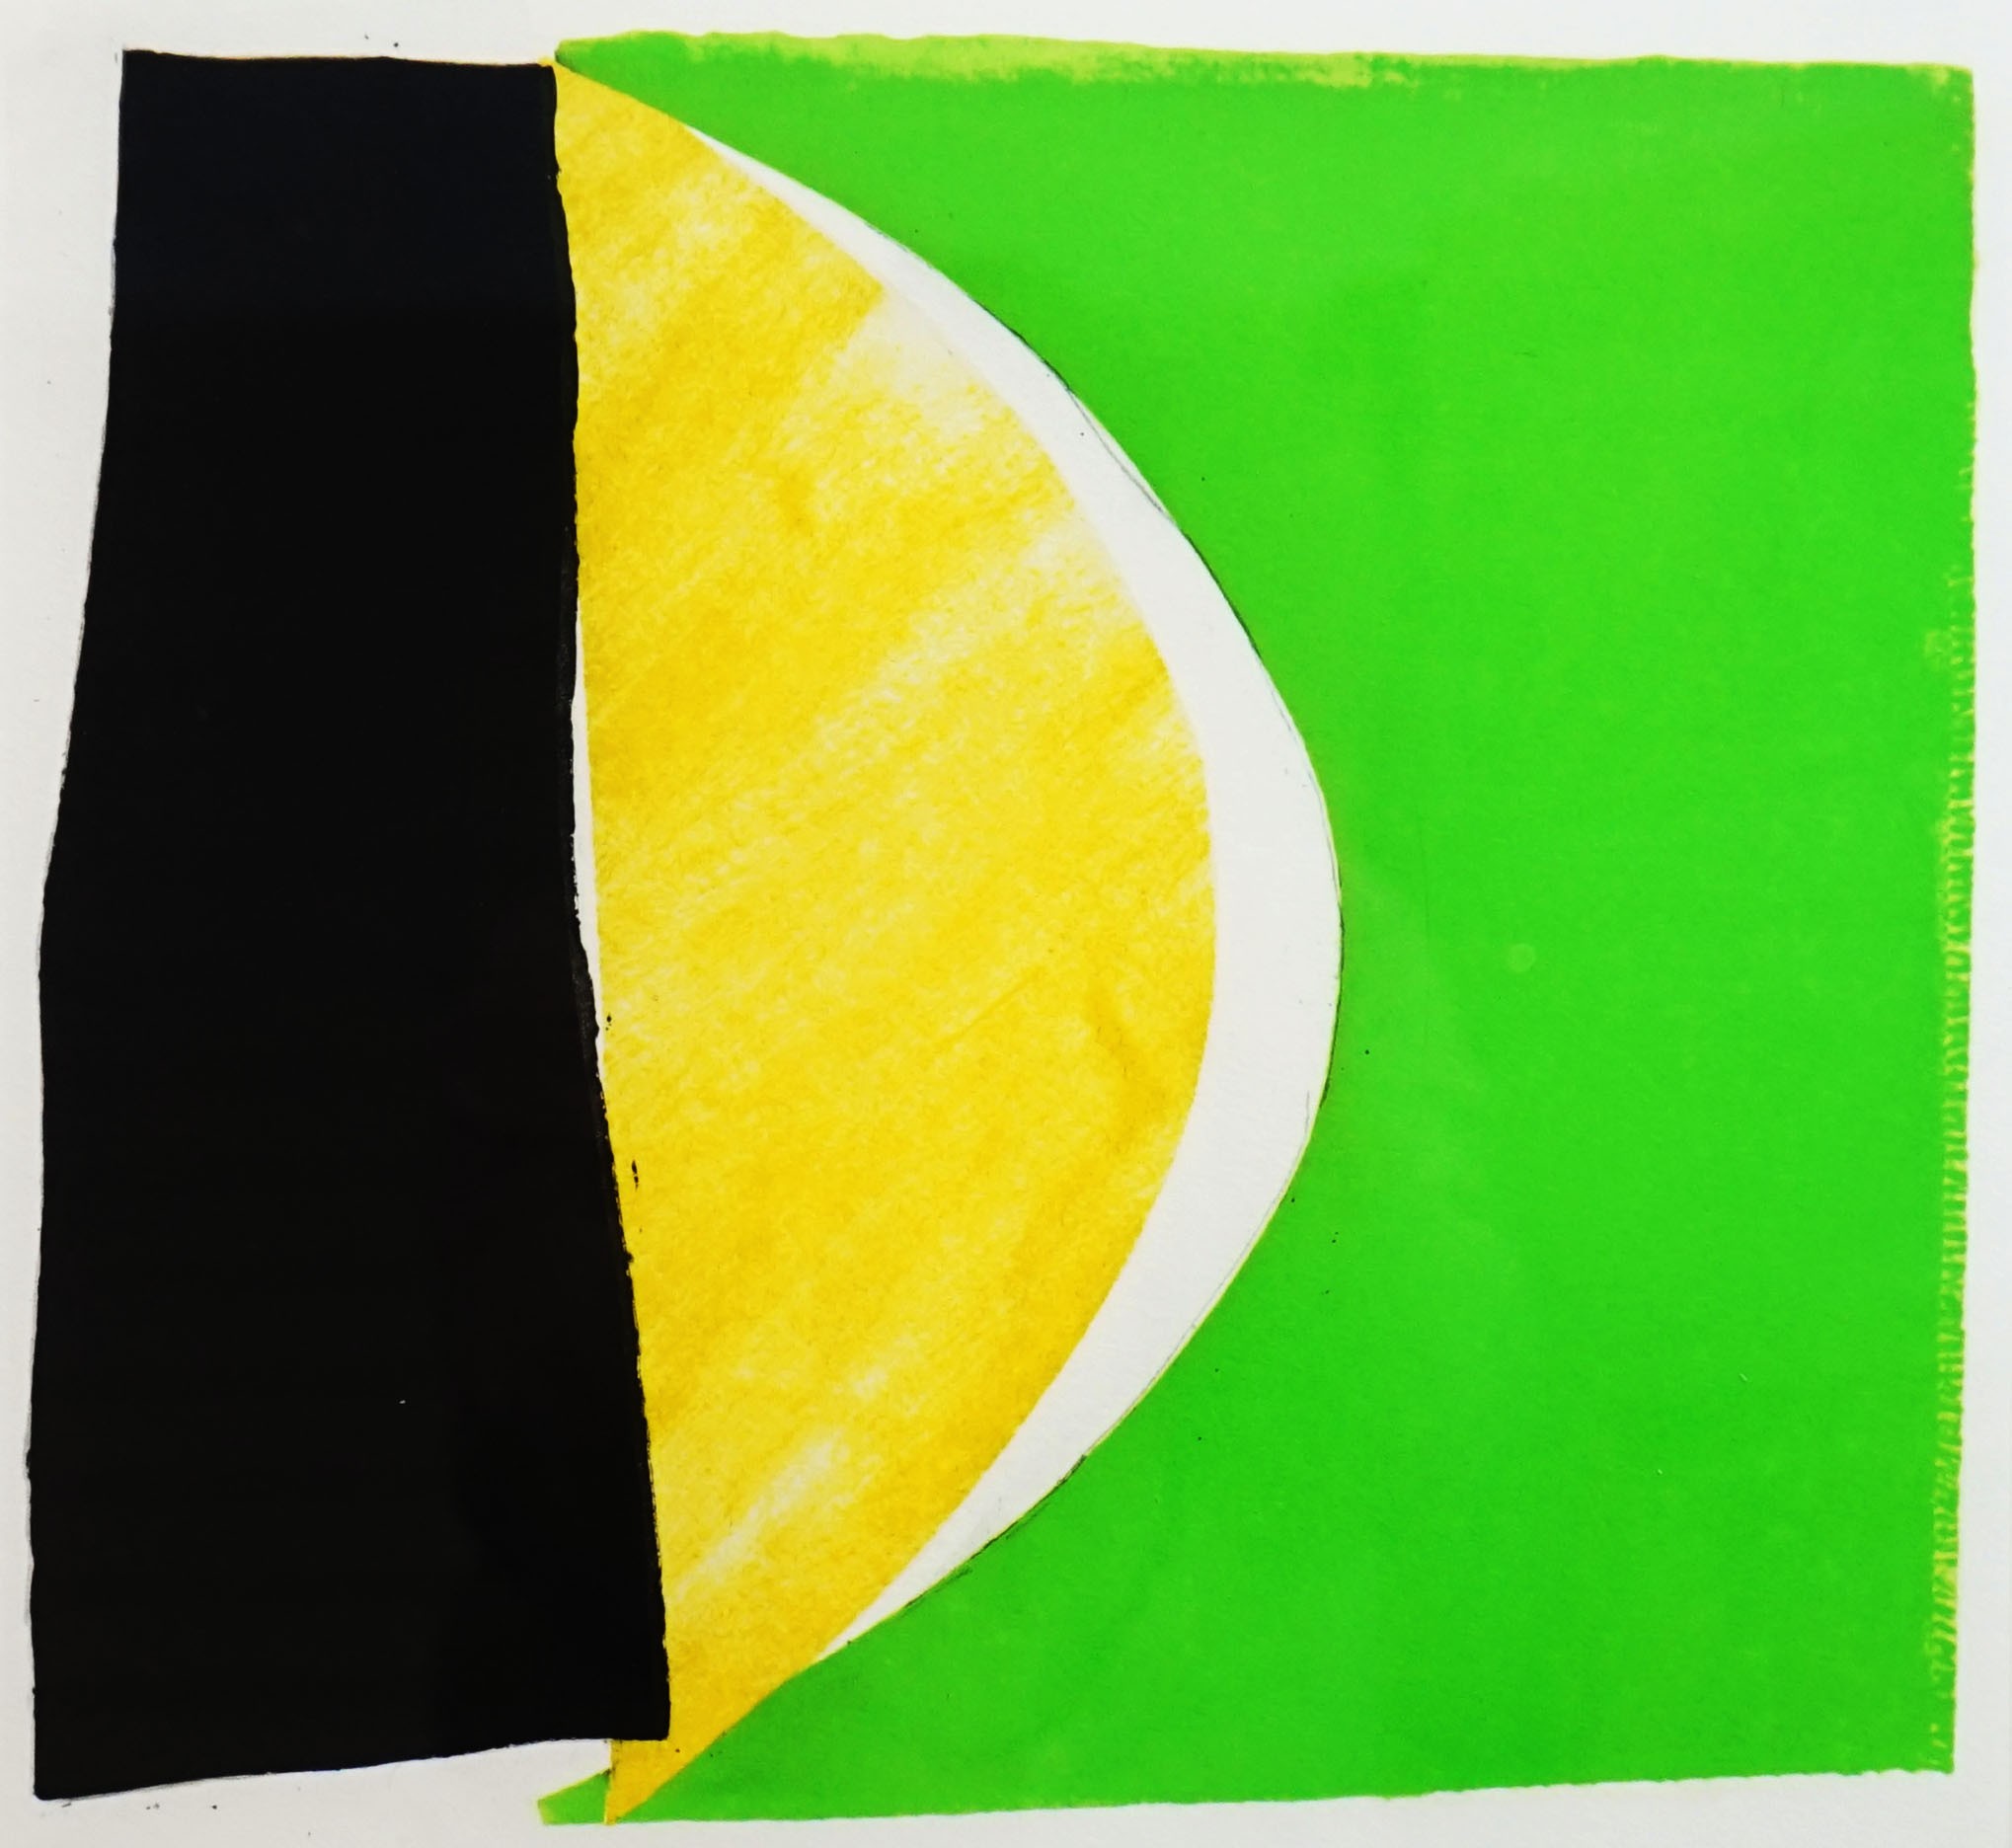 Sir Terry Frost, R.A. (1915-2003), Lemon, Green and Black, 2002, etching and aquatint on heavy wove paper, 38 x 39.5 cm